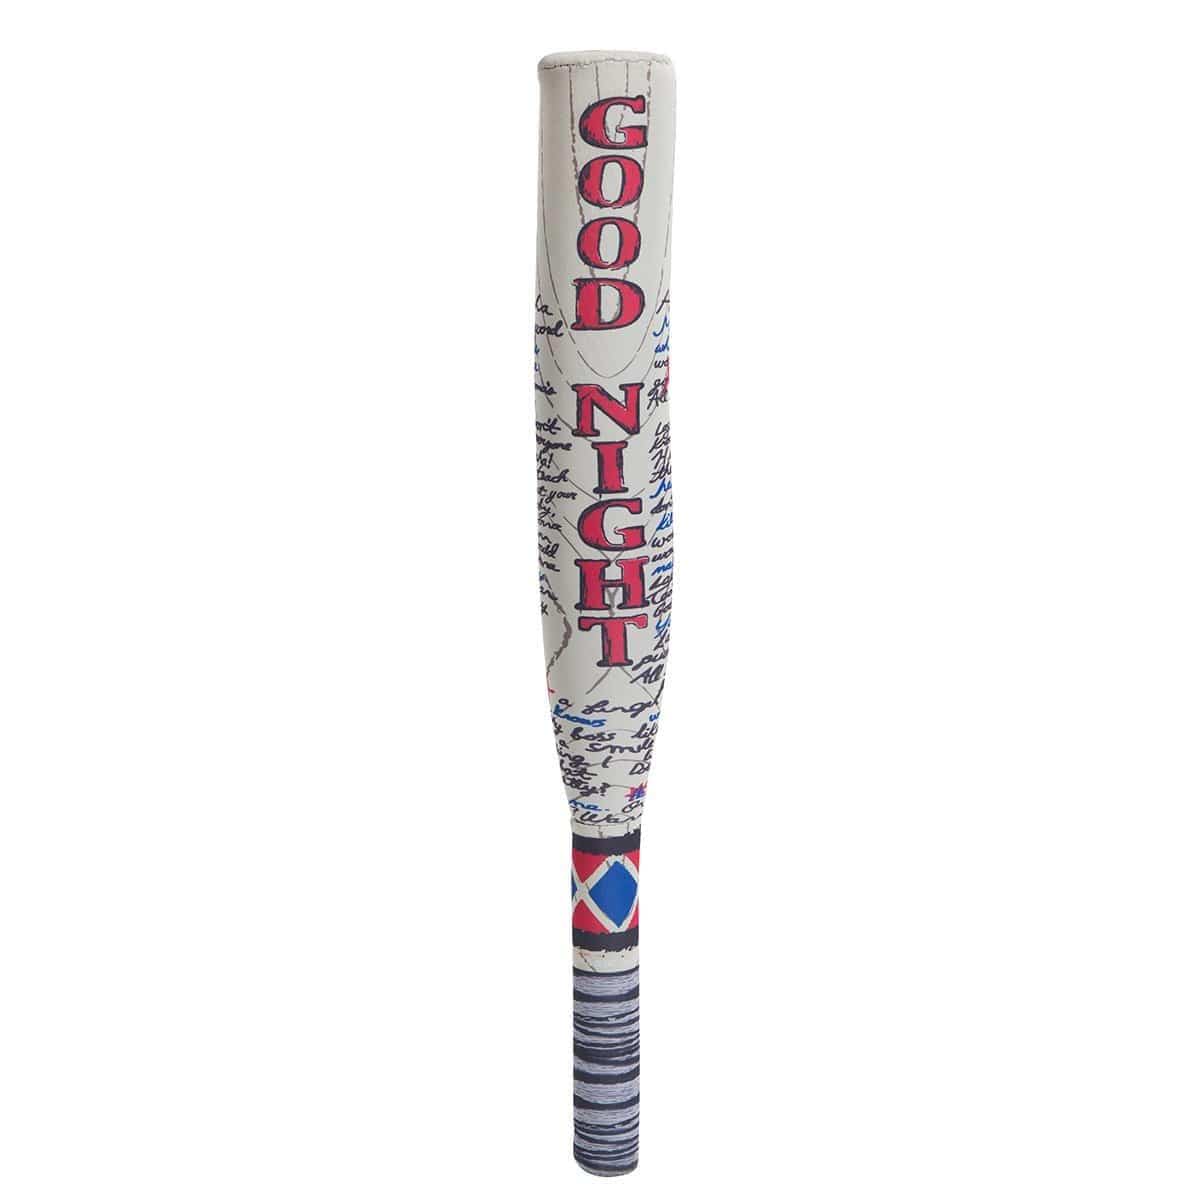 Buy Costume Accessories Harley Quinn bat, Birds of Prey sold at Party Expert